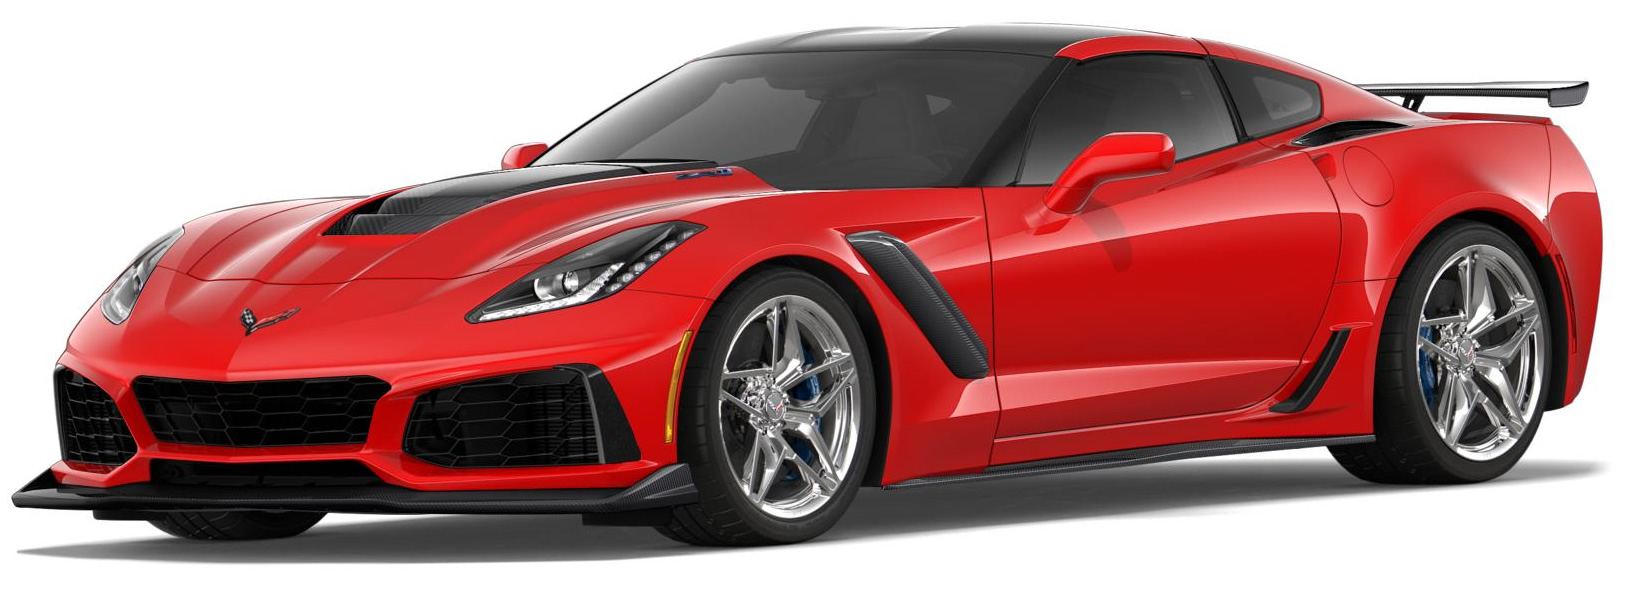 2019 Corvette ZR1 Coupe in Torch Red with Chrome wheels